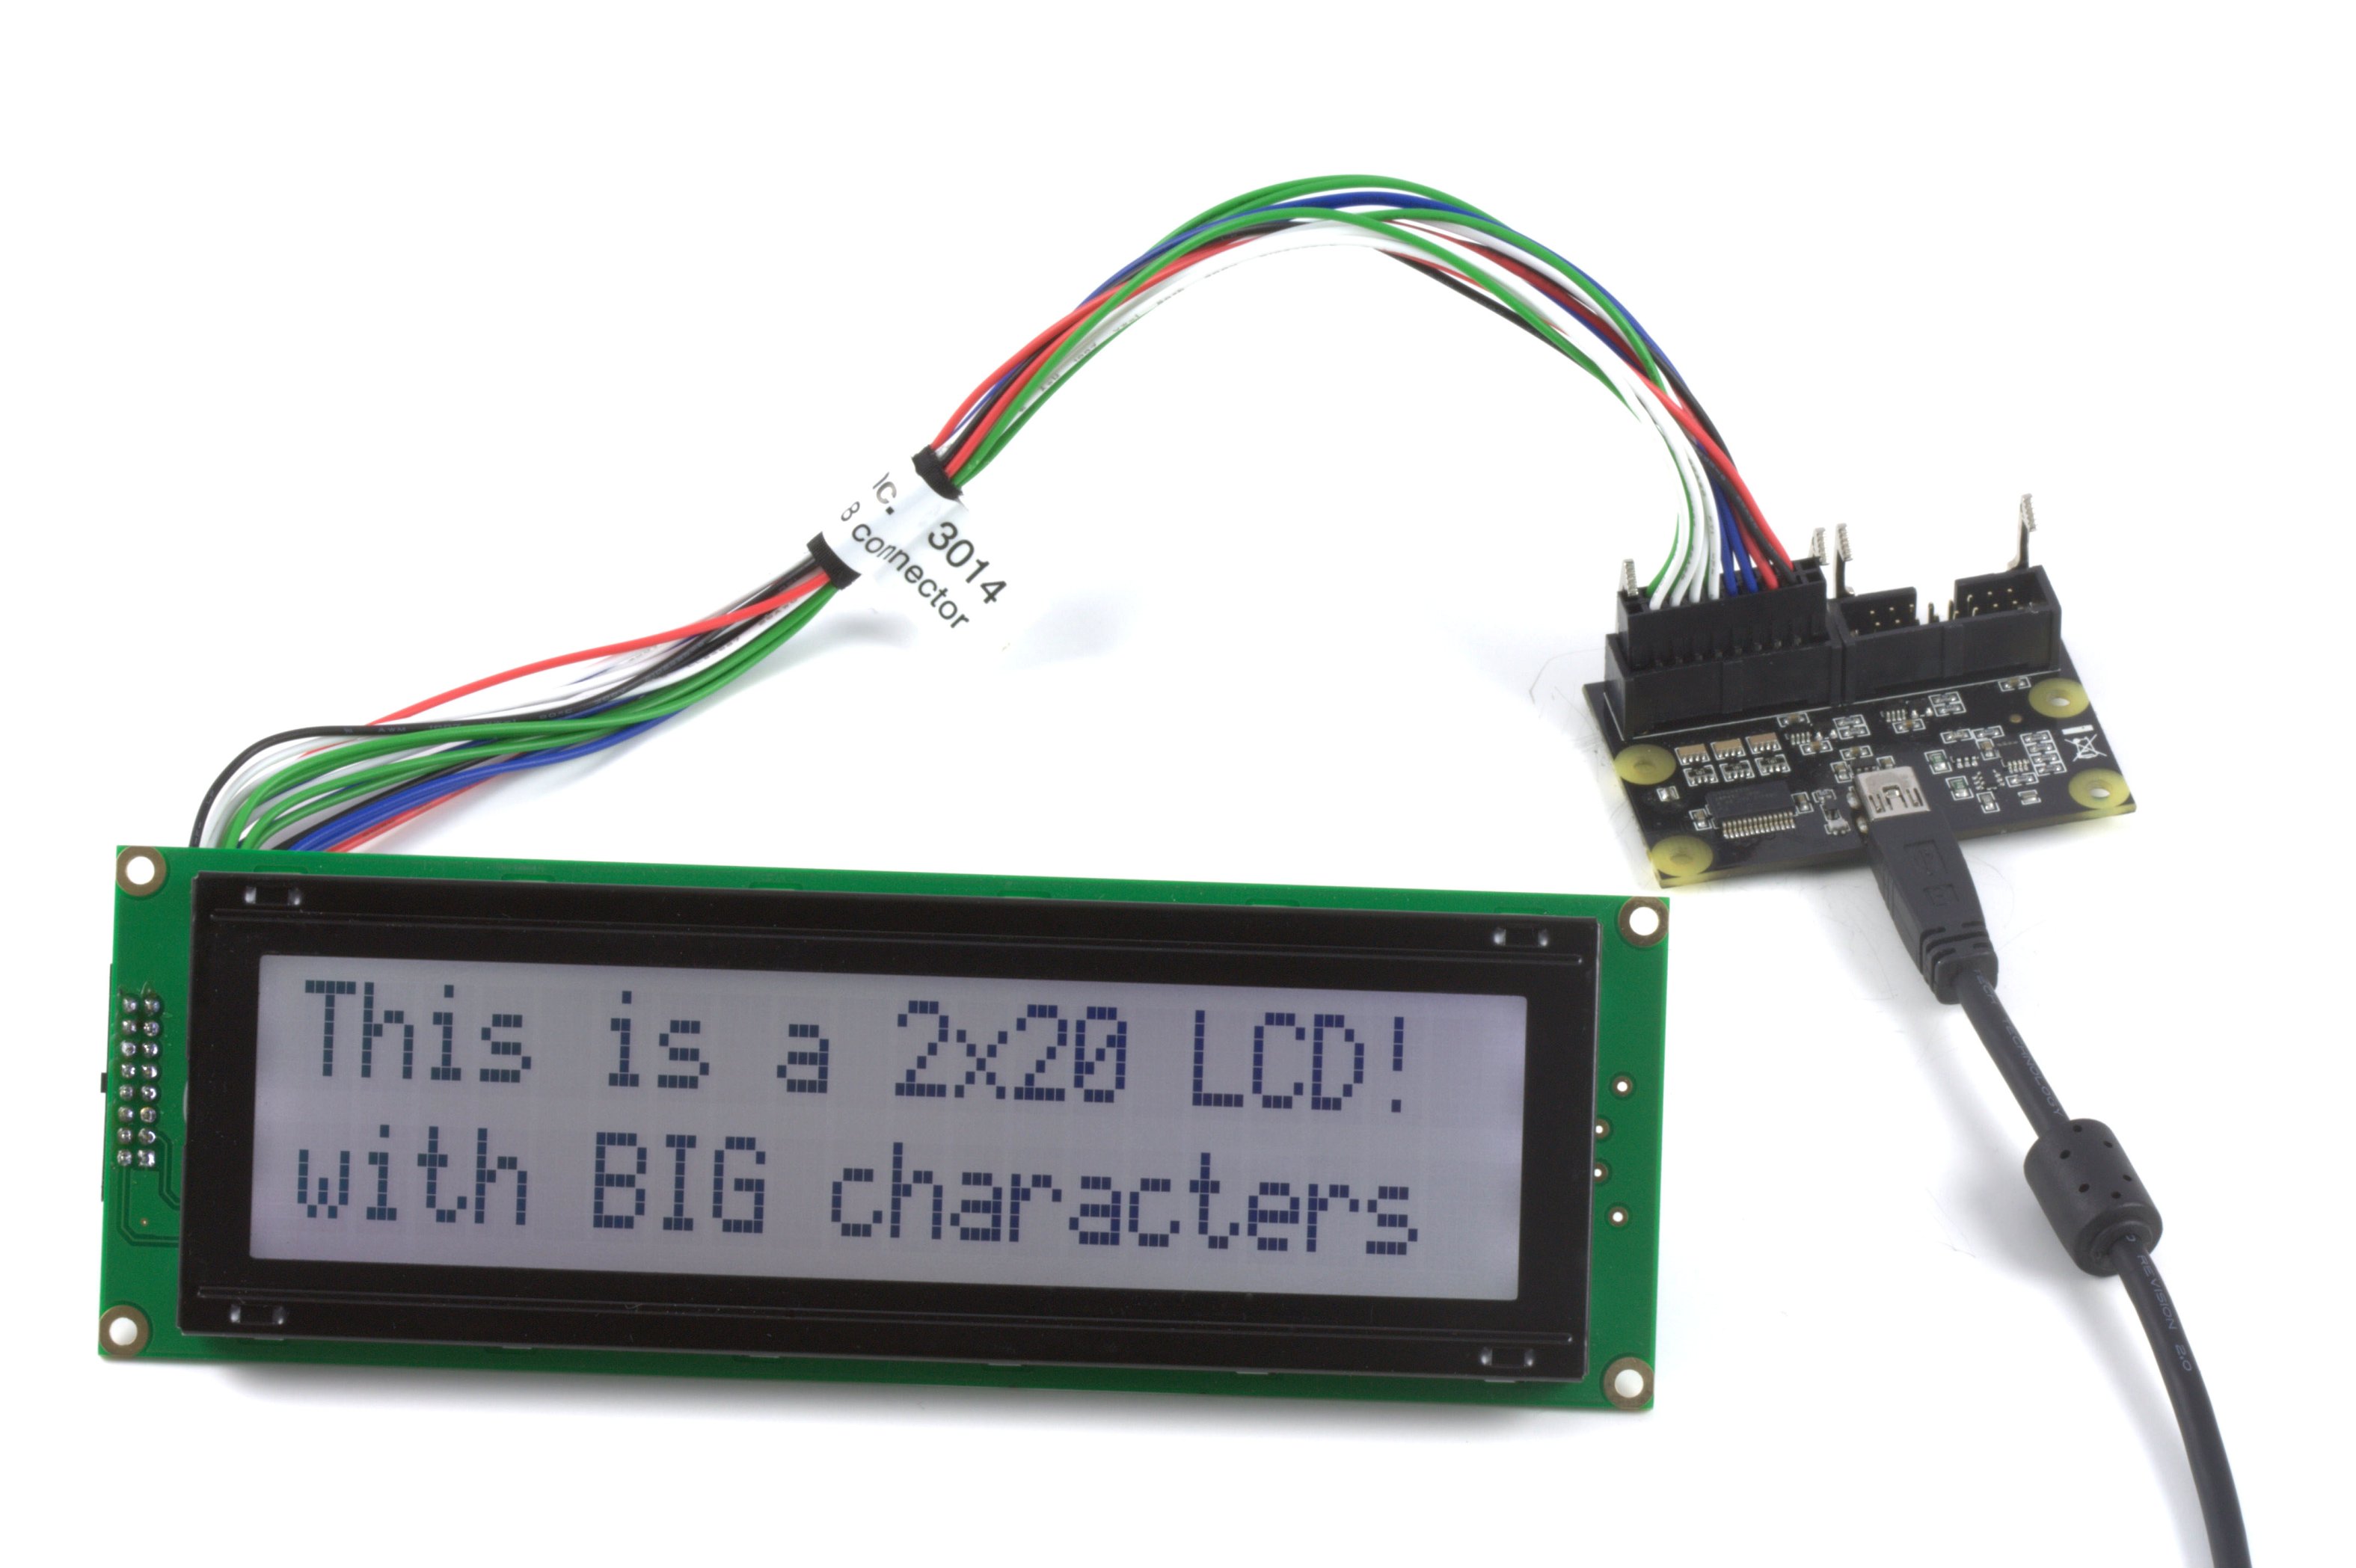 LCD Screen 2x20 (12.7mm Characters)